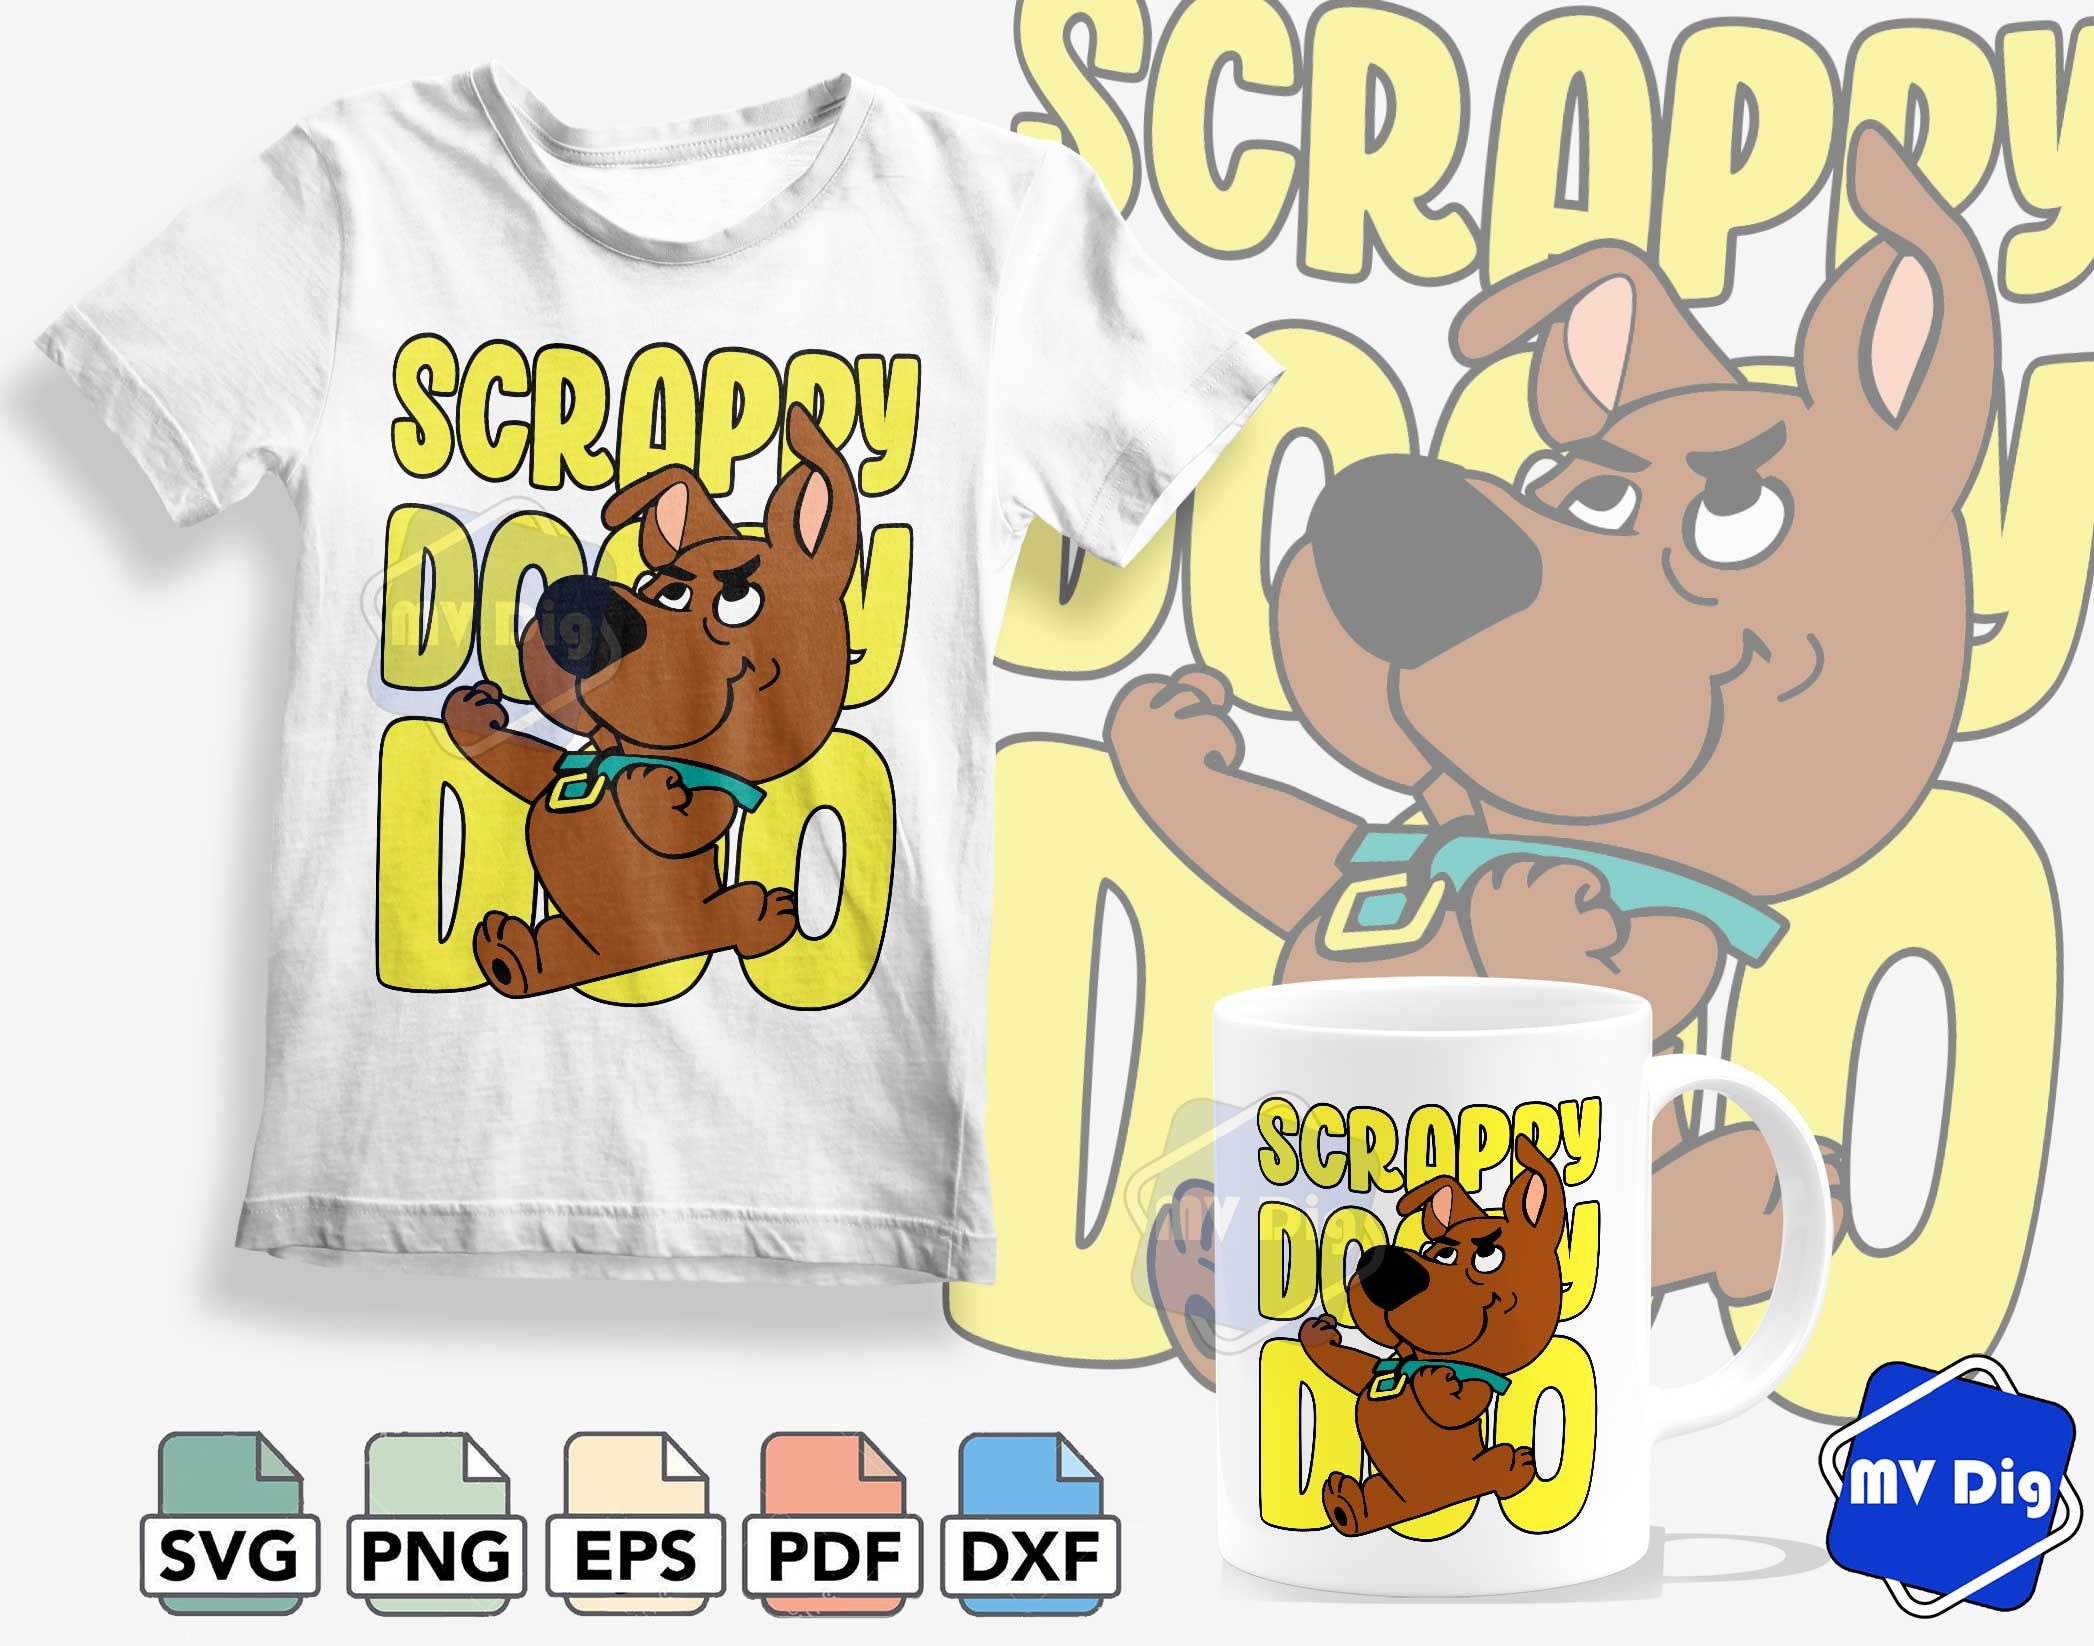 Download 1 Scooby Doo svg T-shirt Template Scooby Loo Shirt Design | Etsy